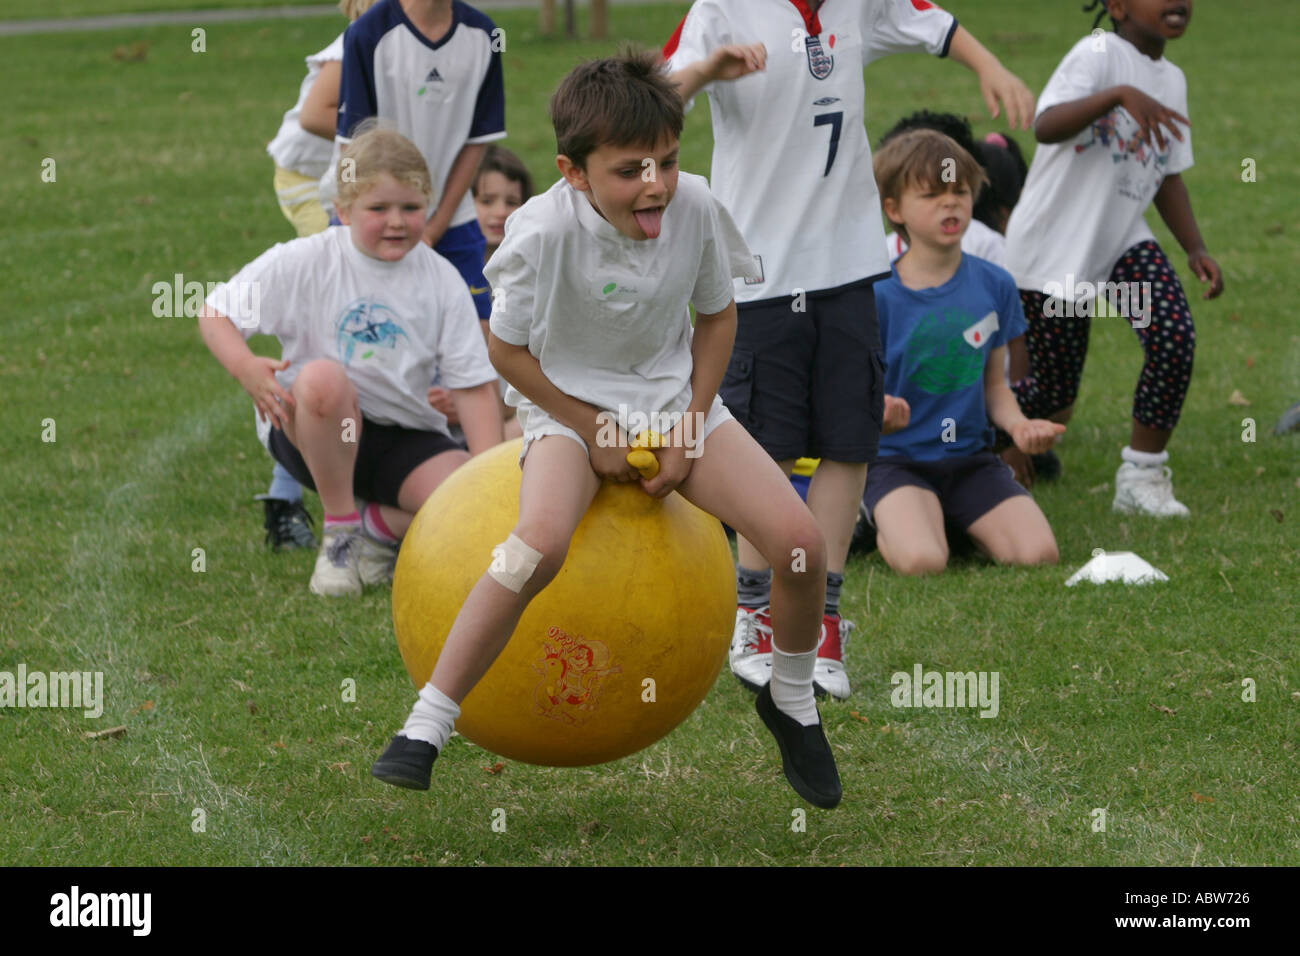 A primary school boy jumps on a bouncing ball during a school sports day, Clissold Park, London, UK. Stock Photo